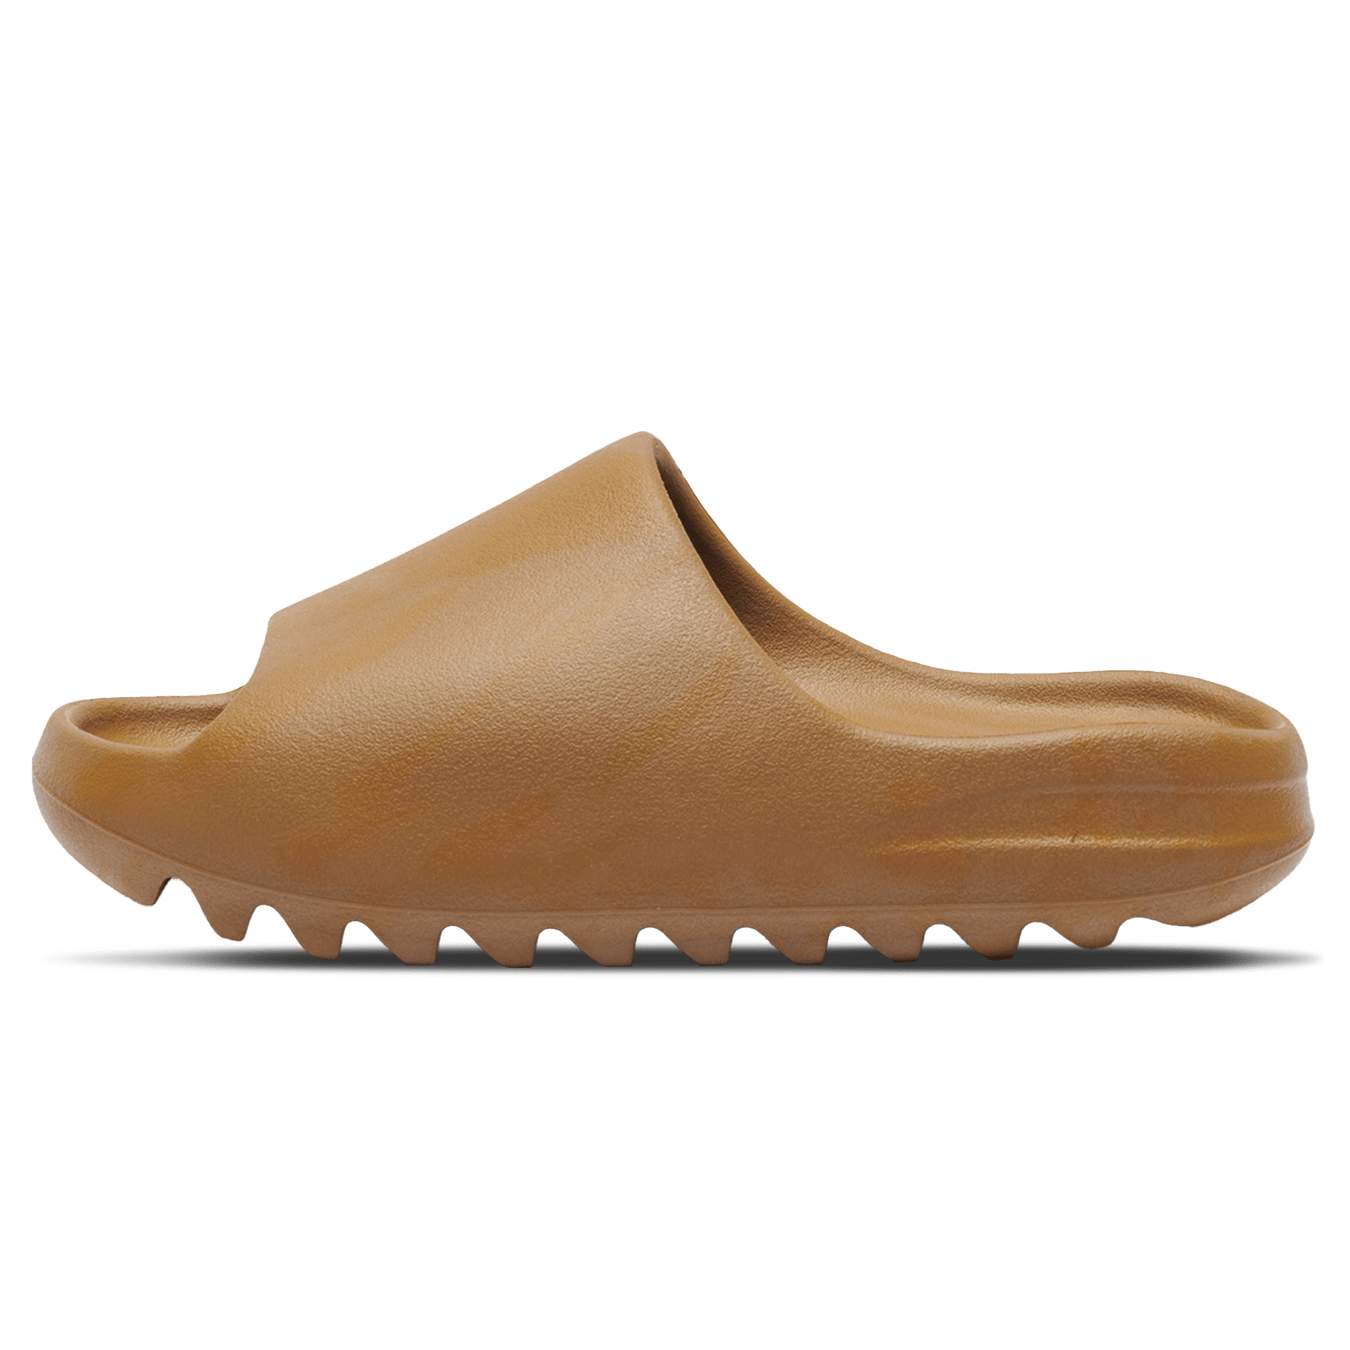 IetpShops, Kanye West and adidas Yeezy will be releasing a brand new  Ochre